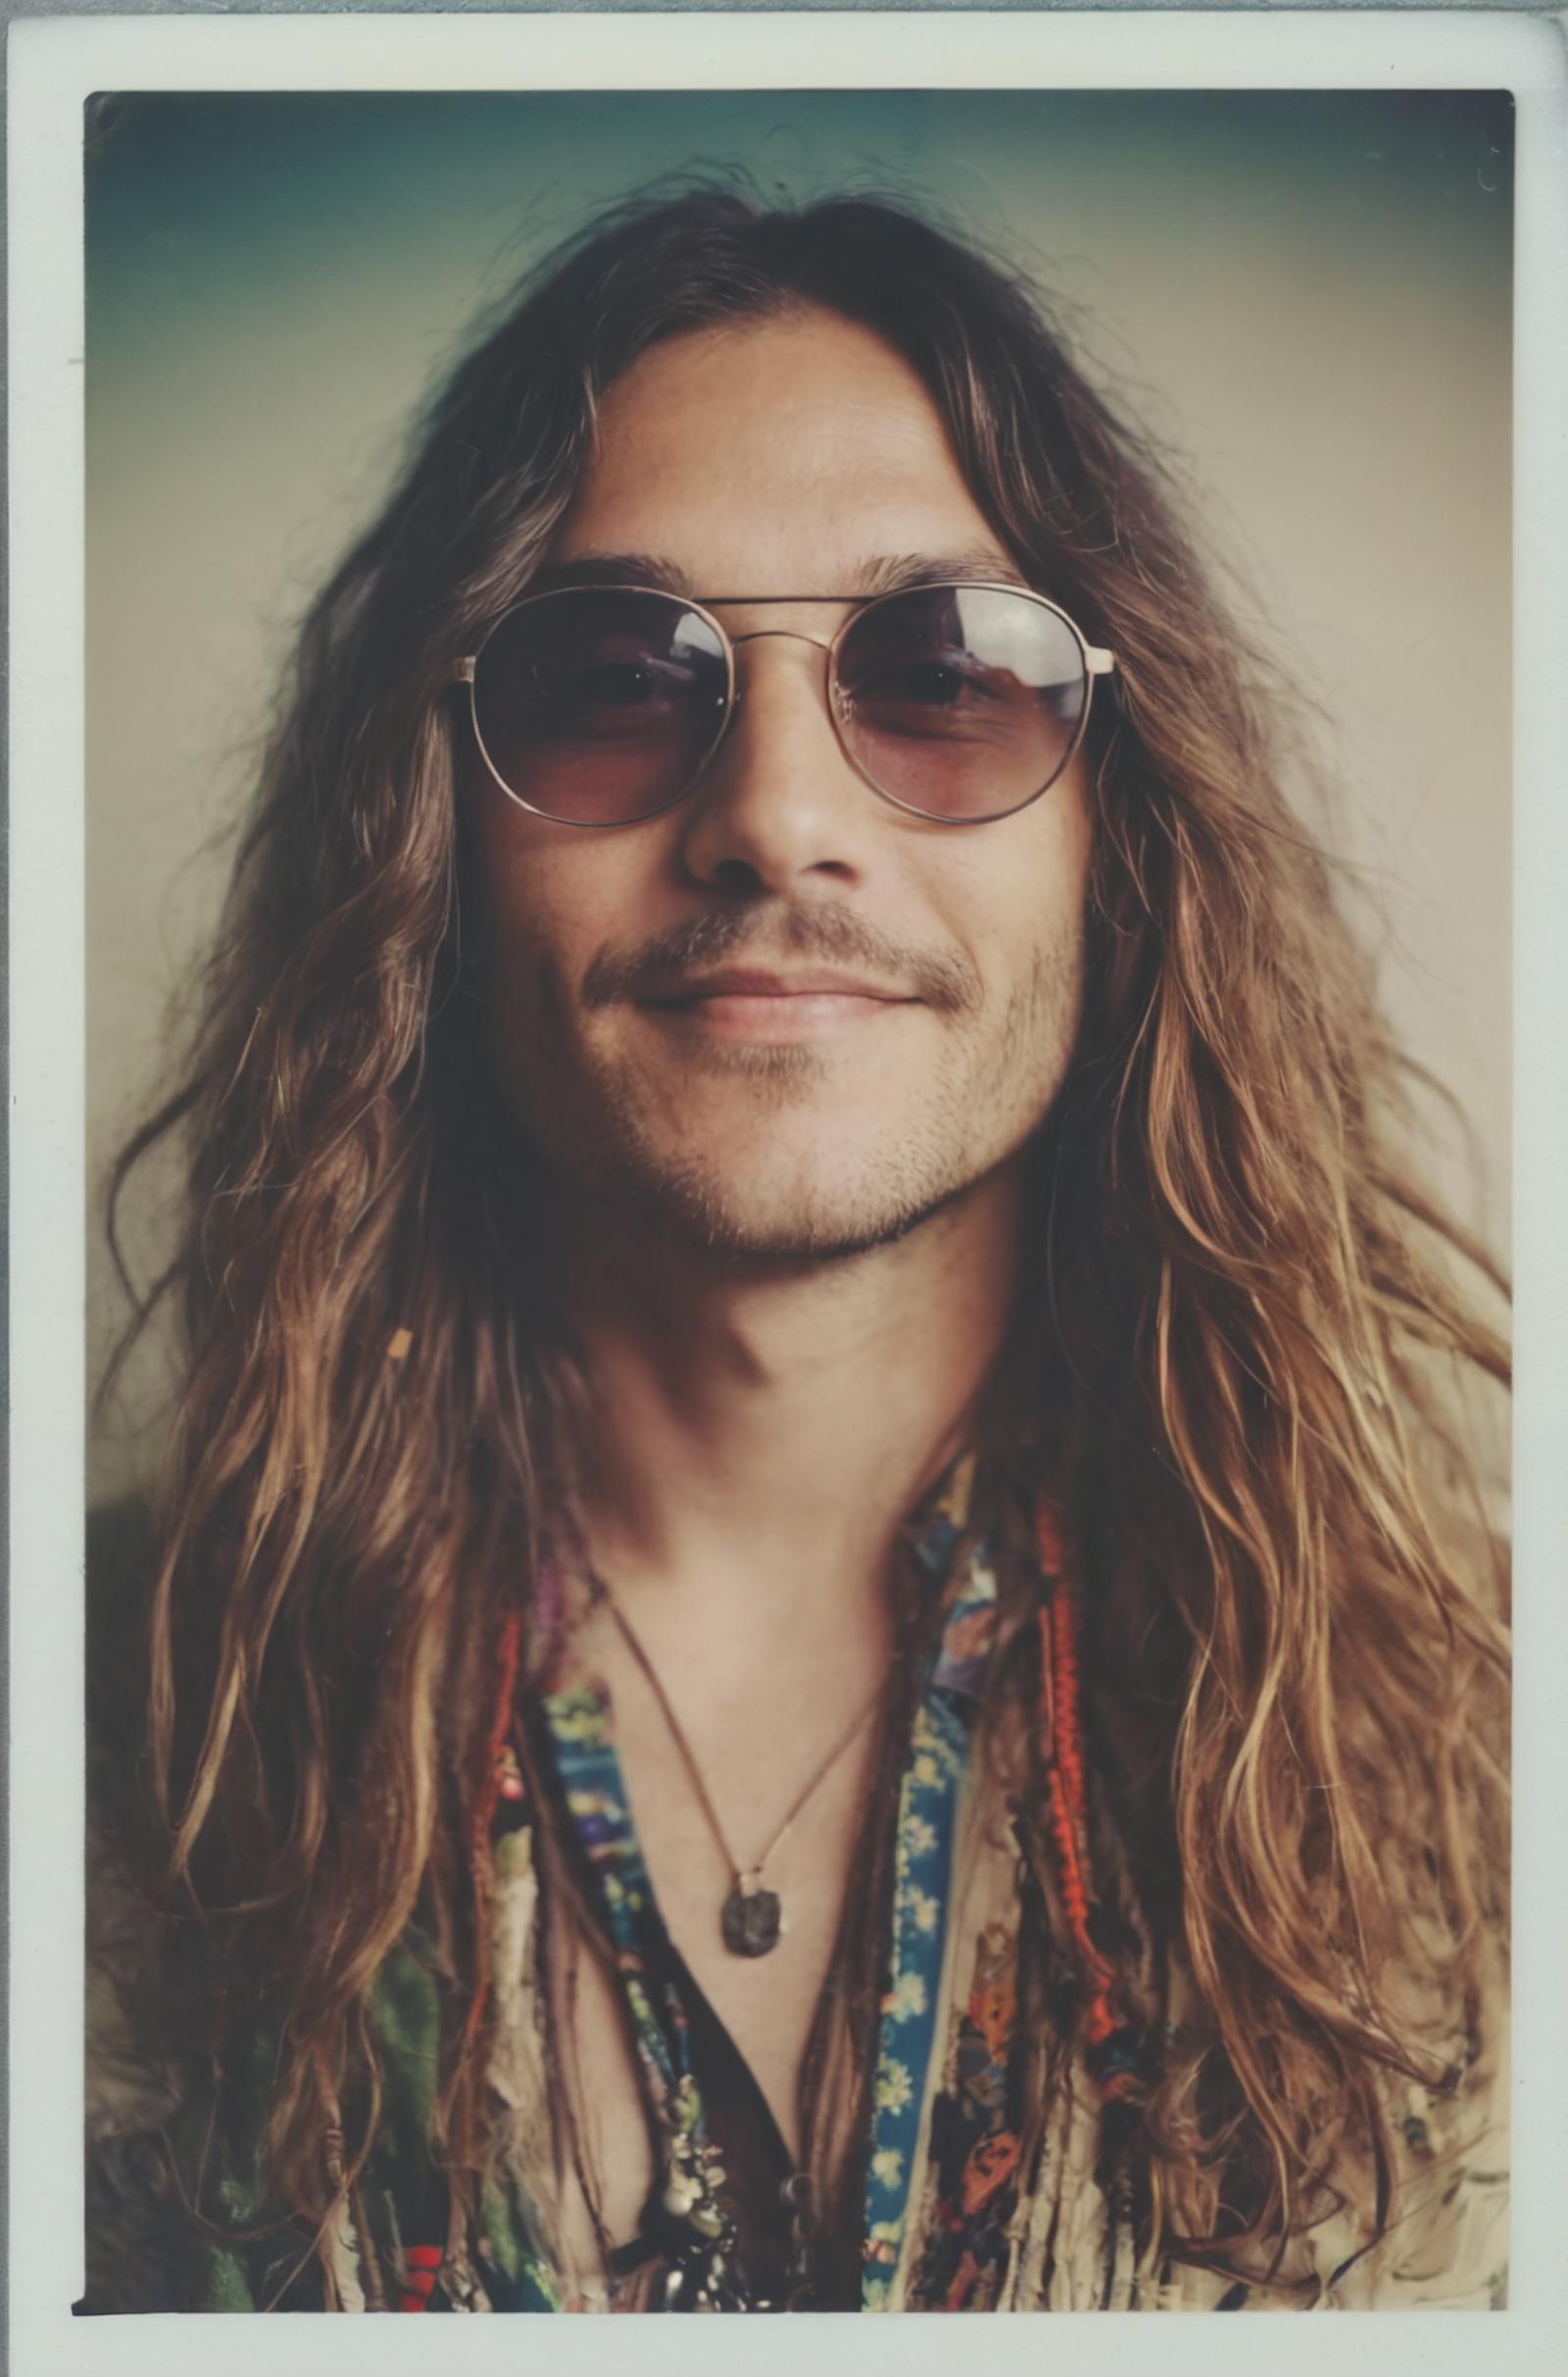 A man with long hair and sunglasses wearing a tie-dyed shirt.